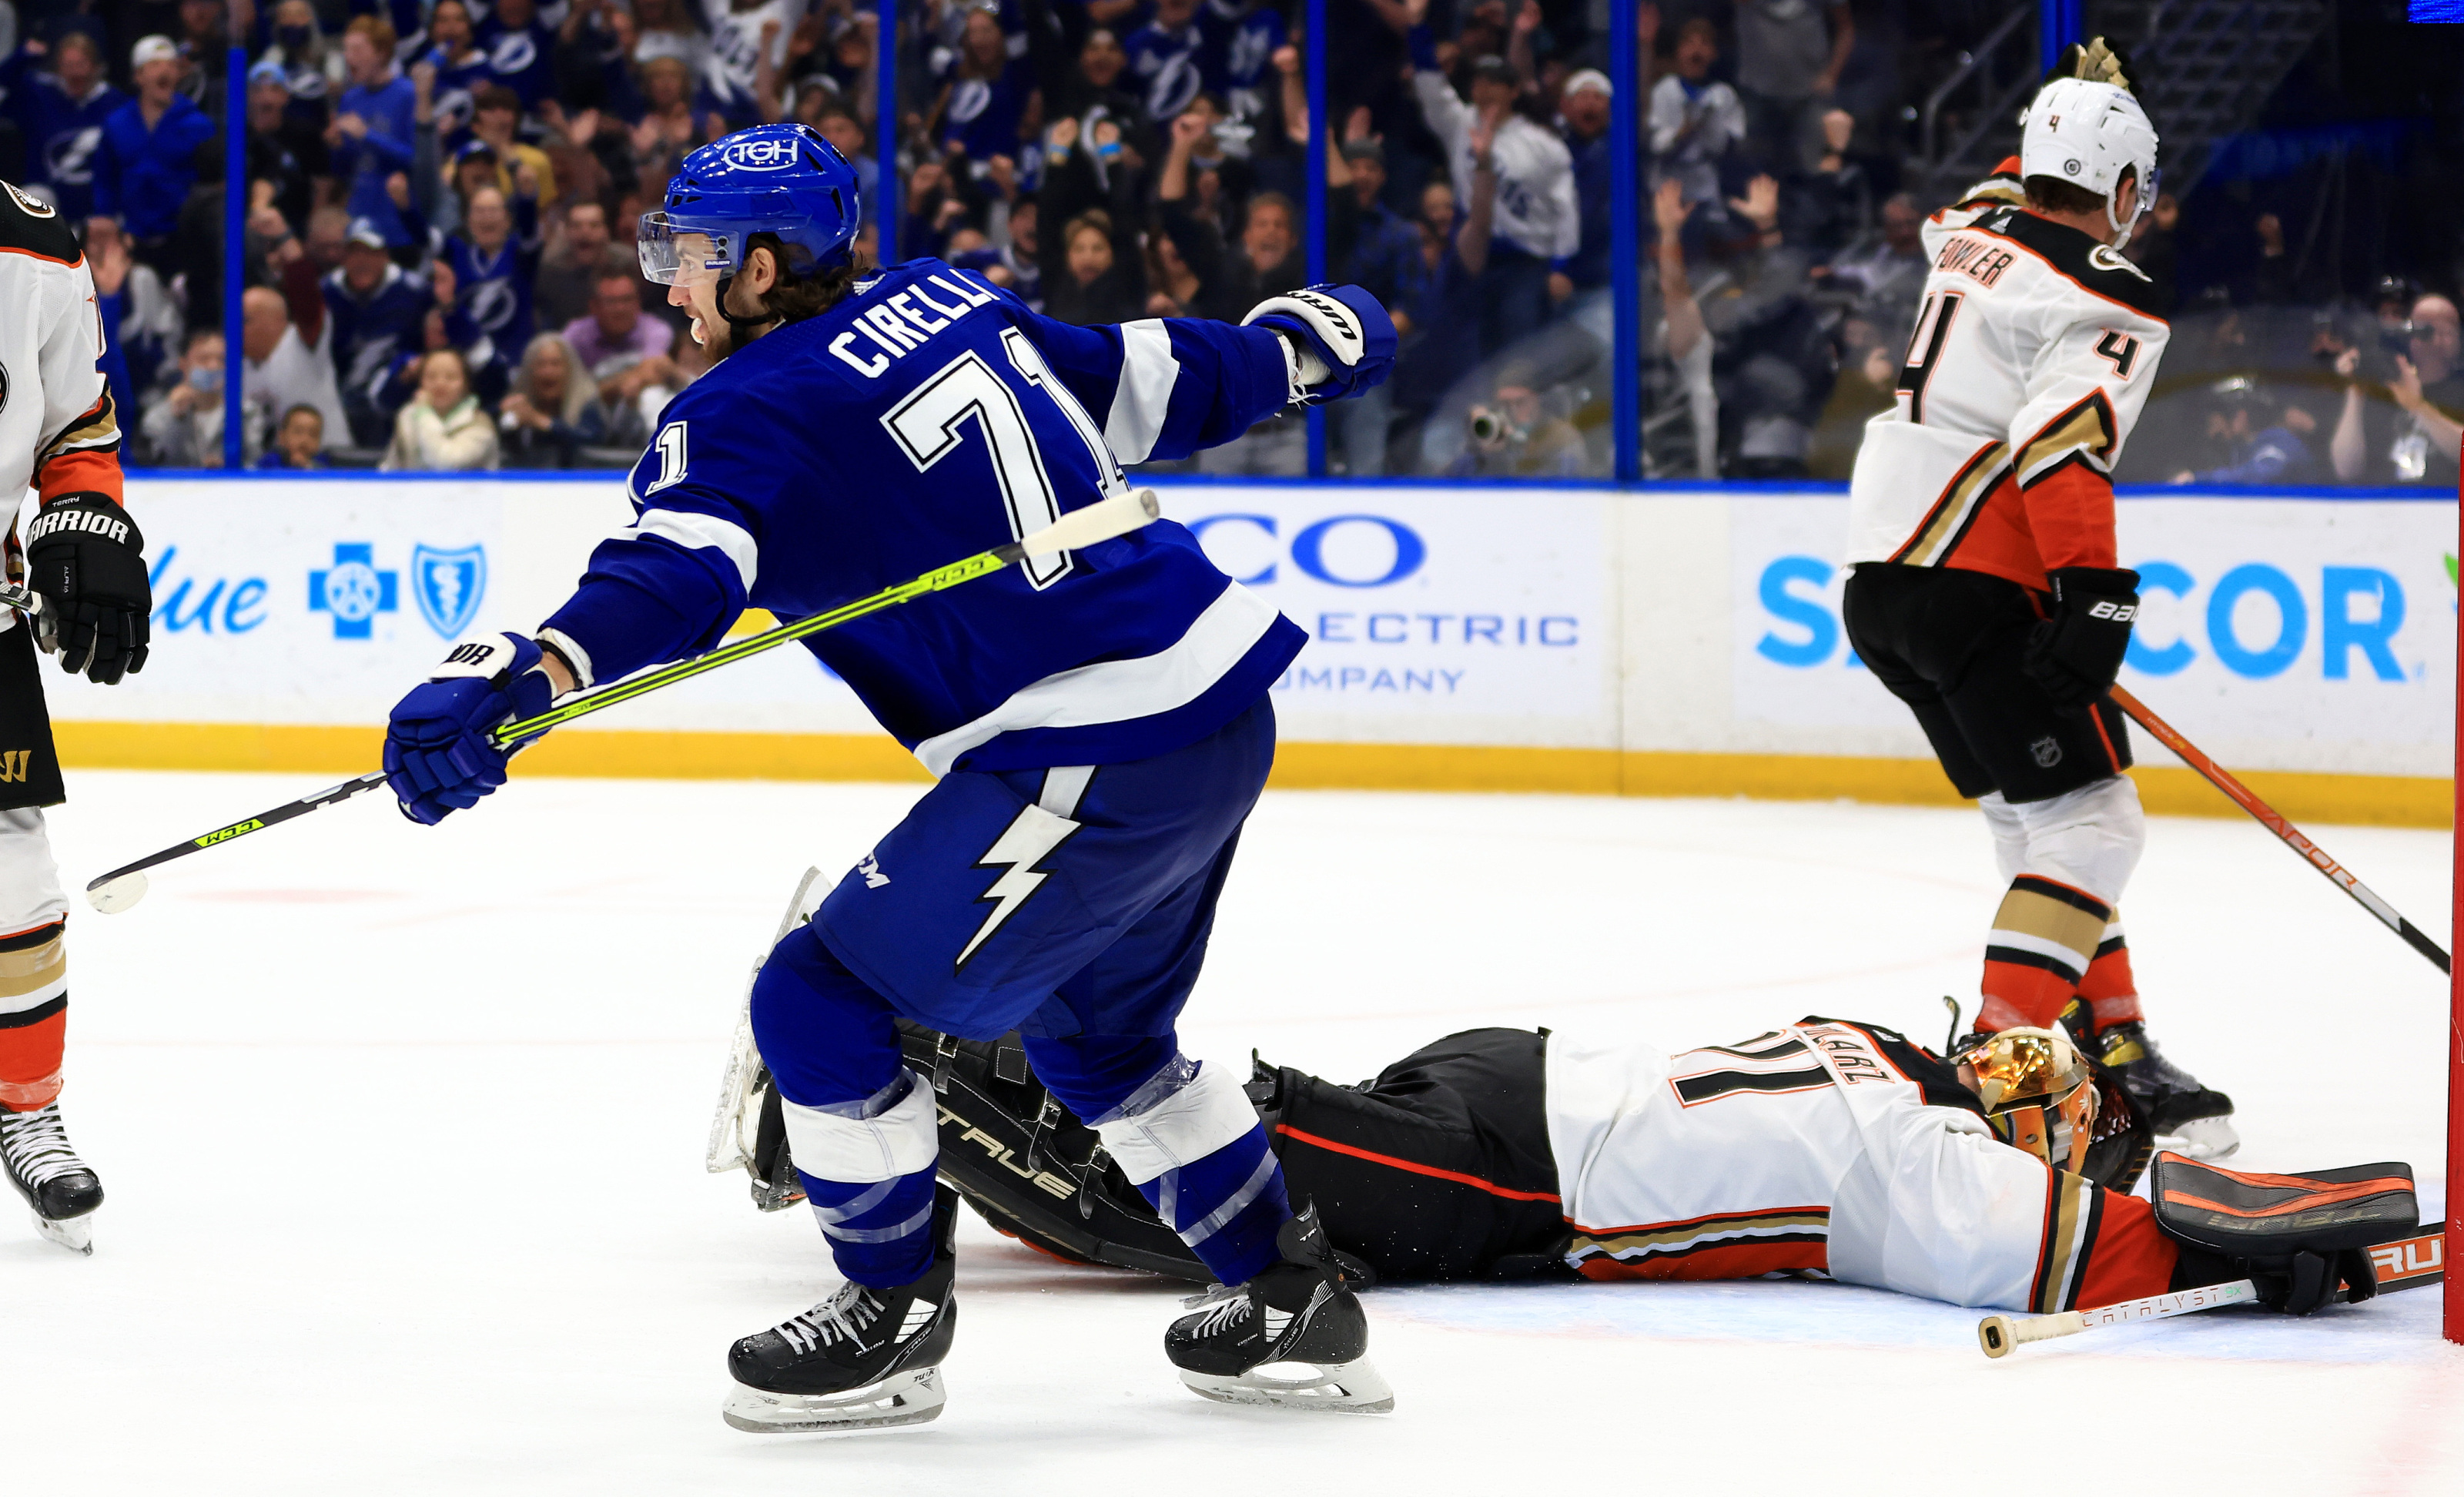 Anaheim Ducks at Tampa Bay Lightning Game Preview, Odds and More